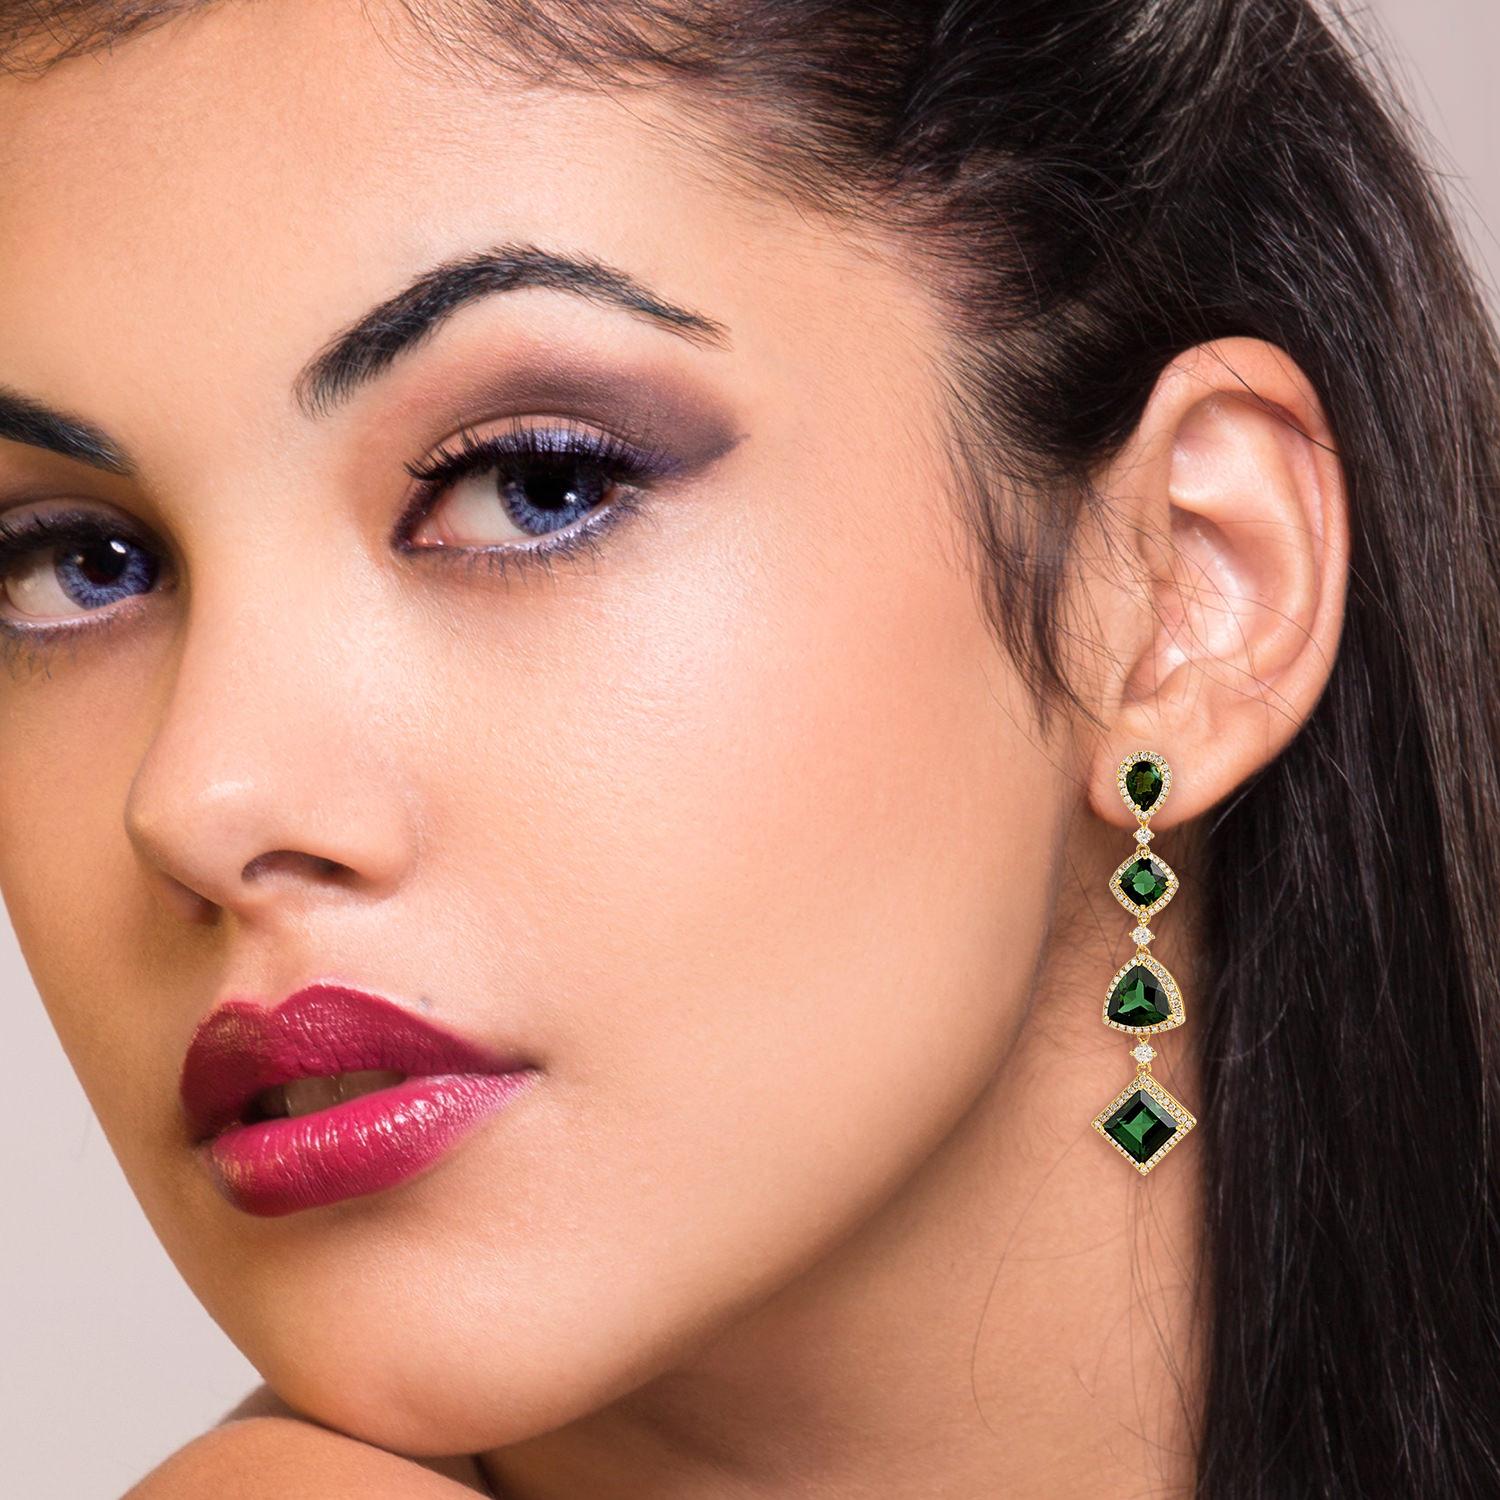 These beautiful drop earring are handcrafted in 18-karat gold. It is set with 15.48 carats tourmaline and 1.51 carats of glimmering diamonds.

FOLLOW  MEGHNA JEWELS storefront to view the latest collection & exclusive pieces.  Meghna Jewels is